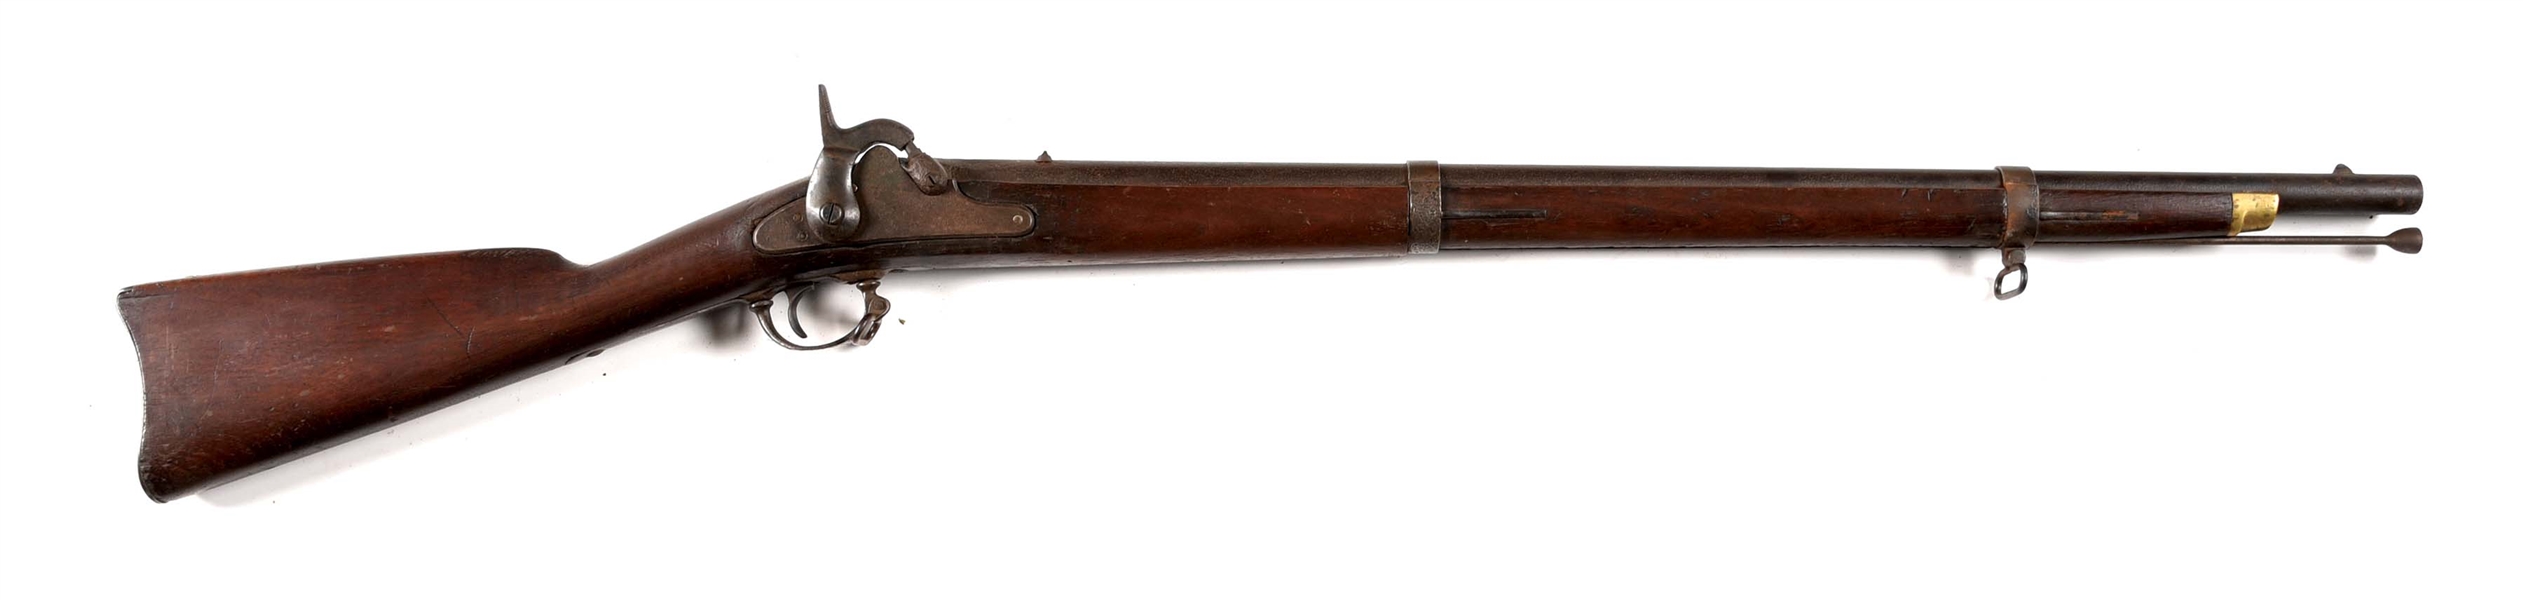 (A) COMPOSITE CS RICHMOND TYPE II PERCUSSION SHORT RIFLE MUSKET DATED 1862.